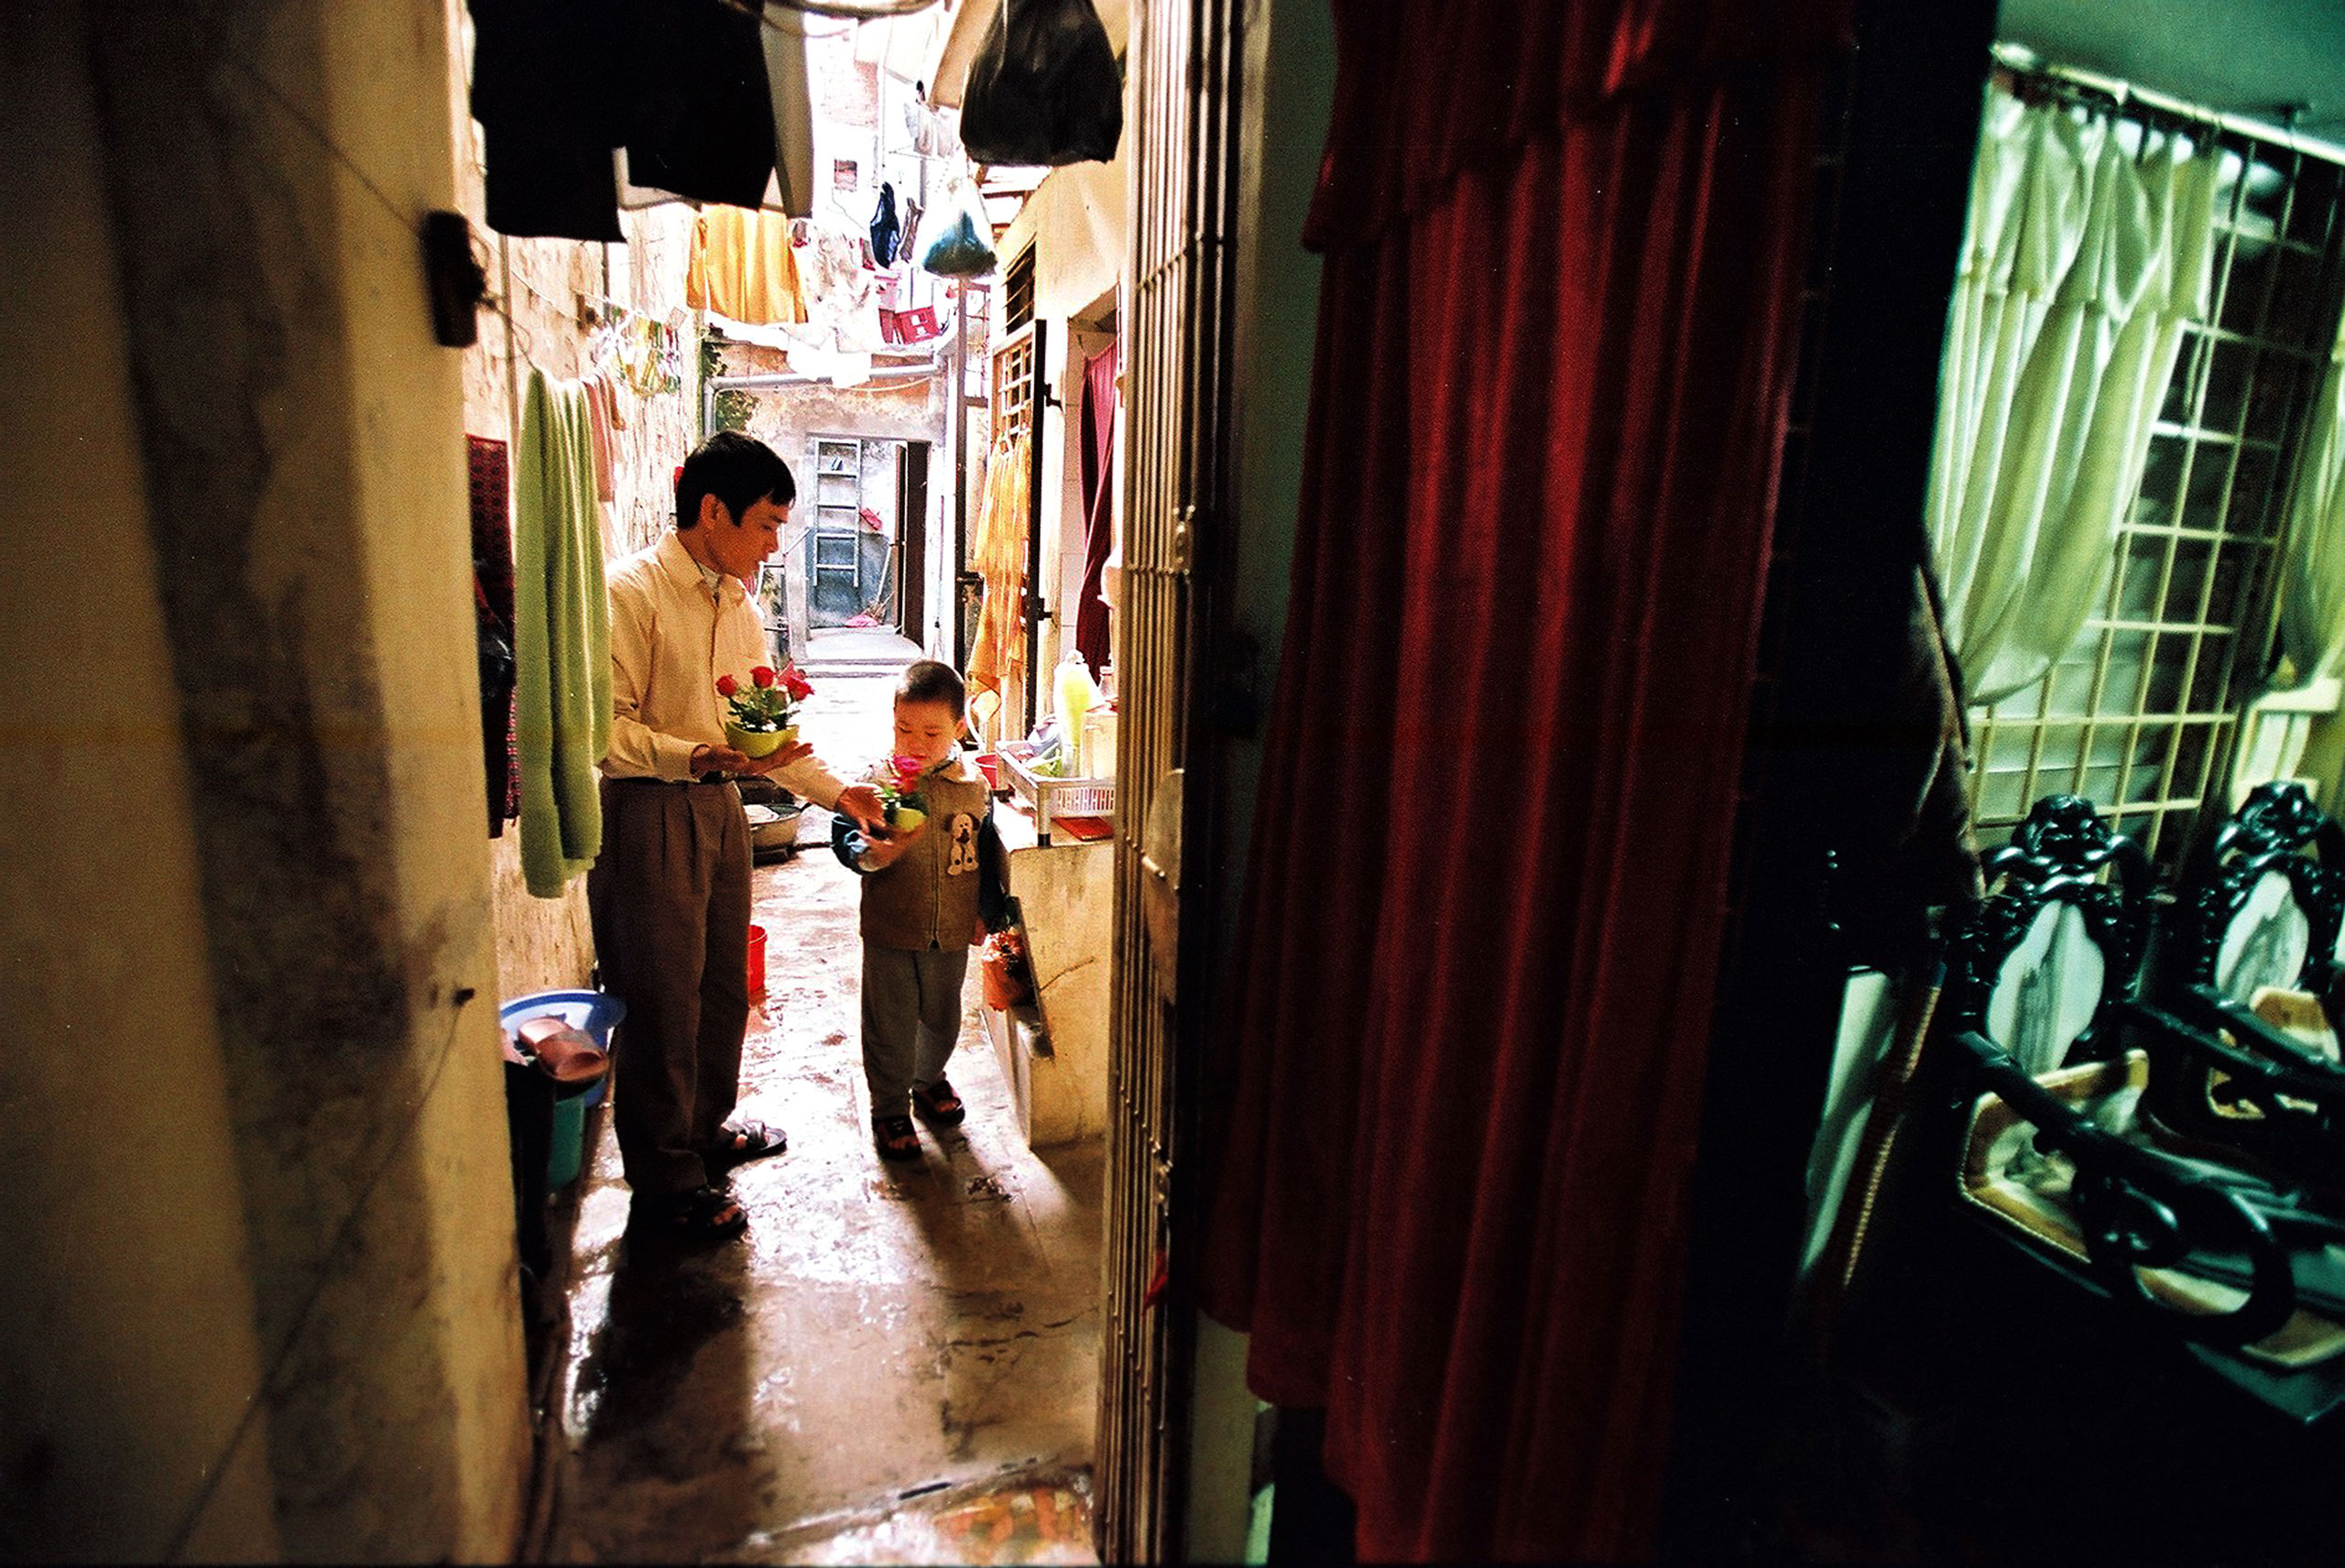 A father and his son arrange flowers together in Hanoi, March 17, 2009.